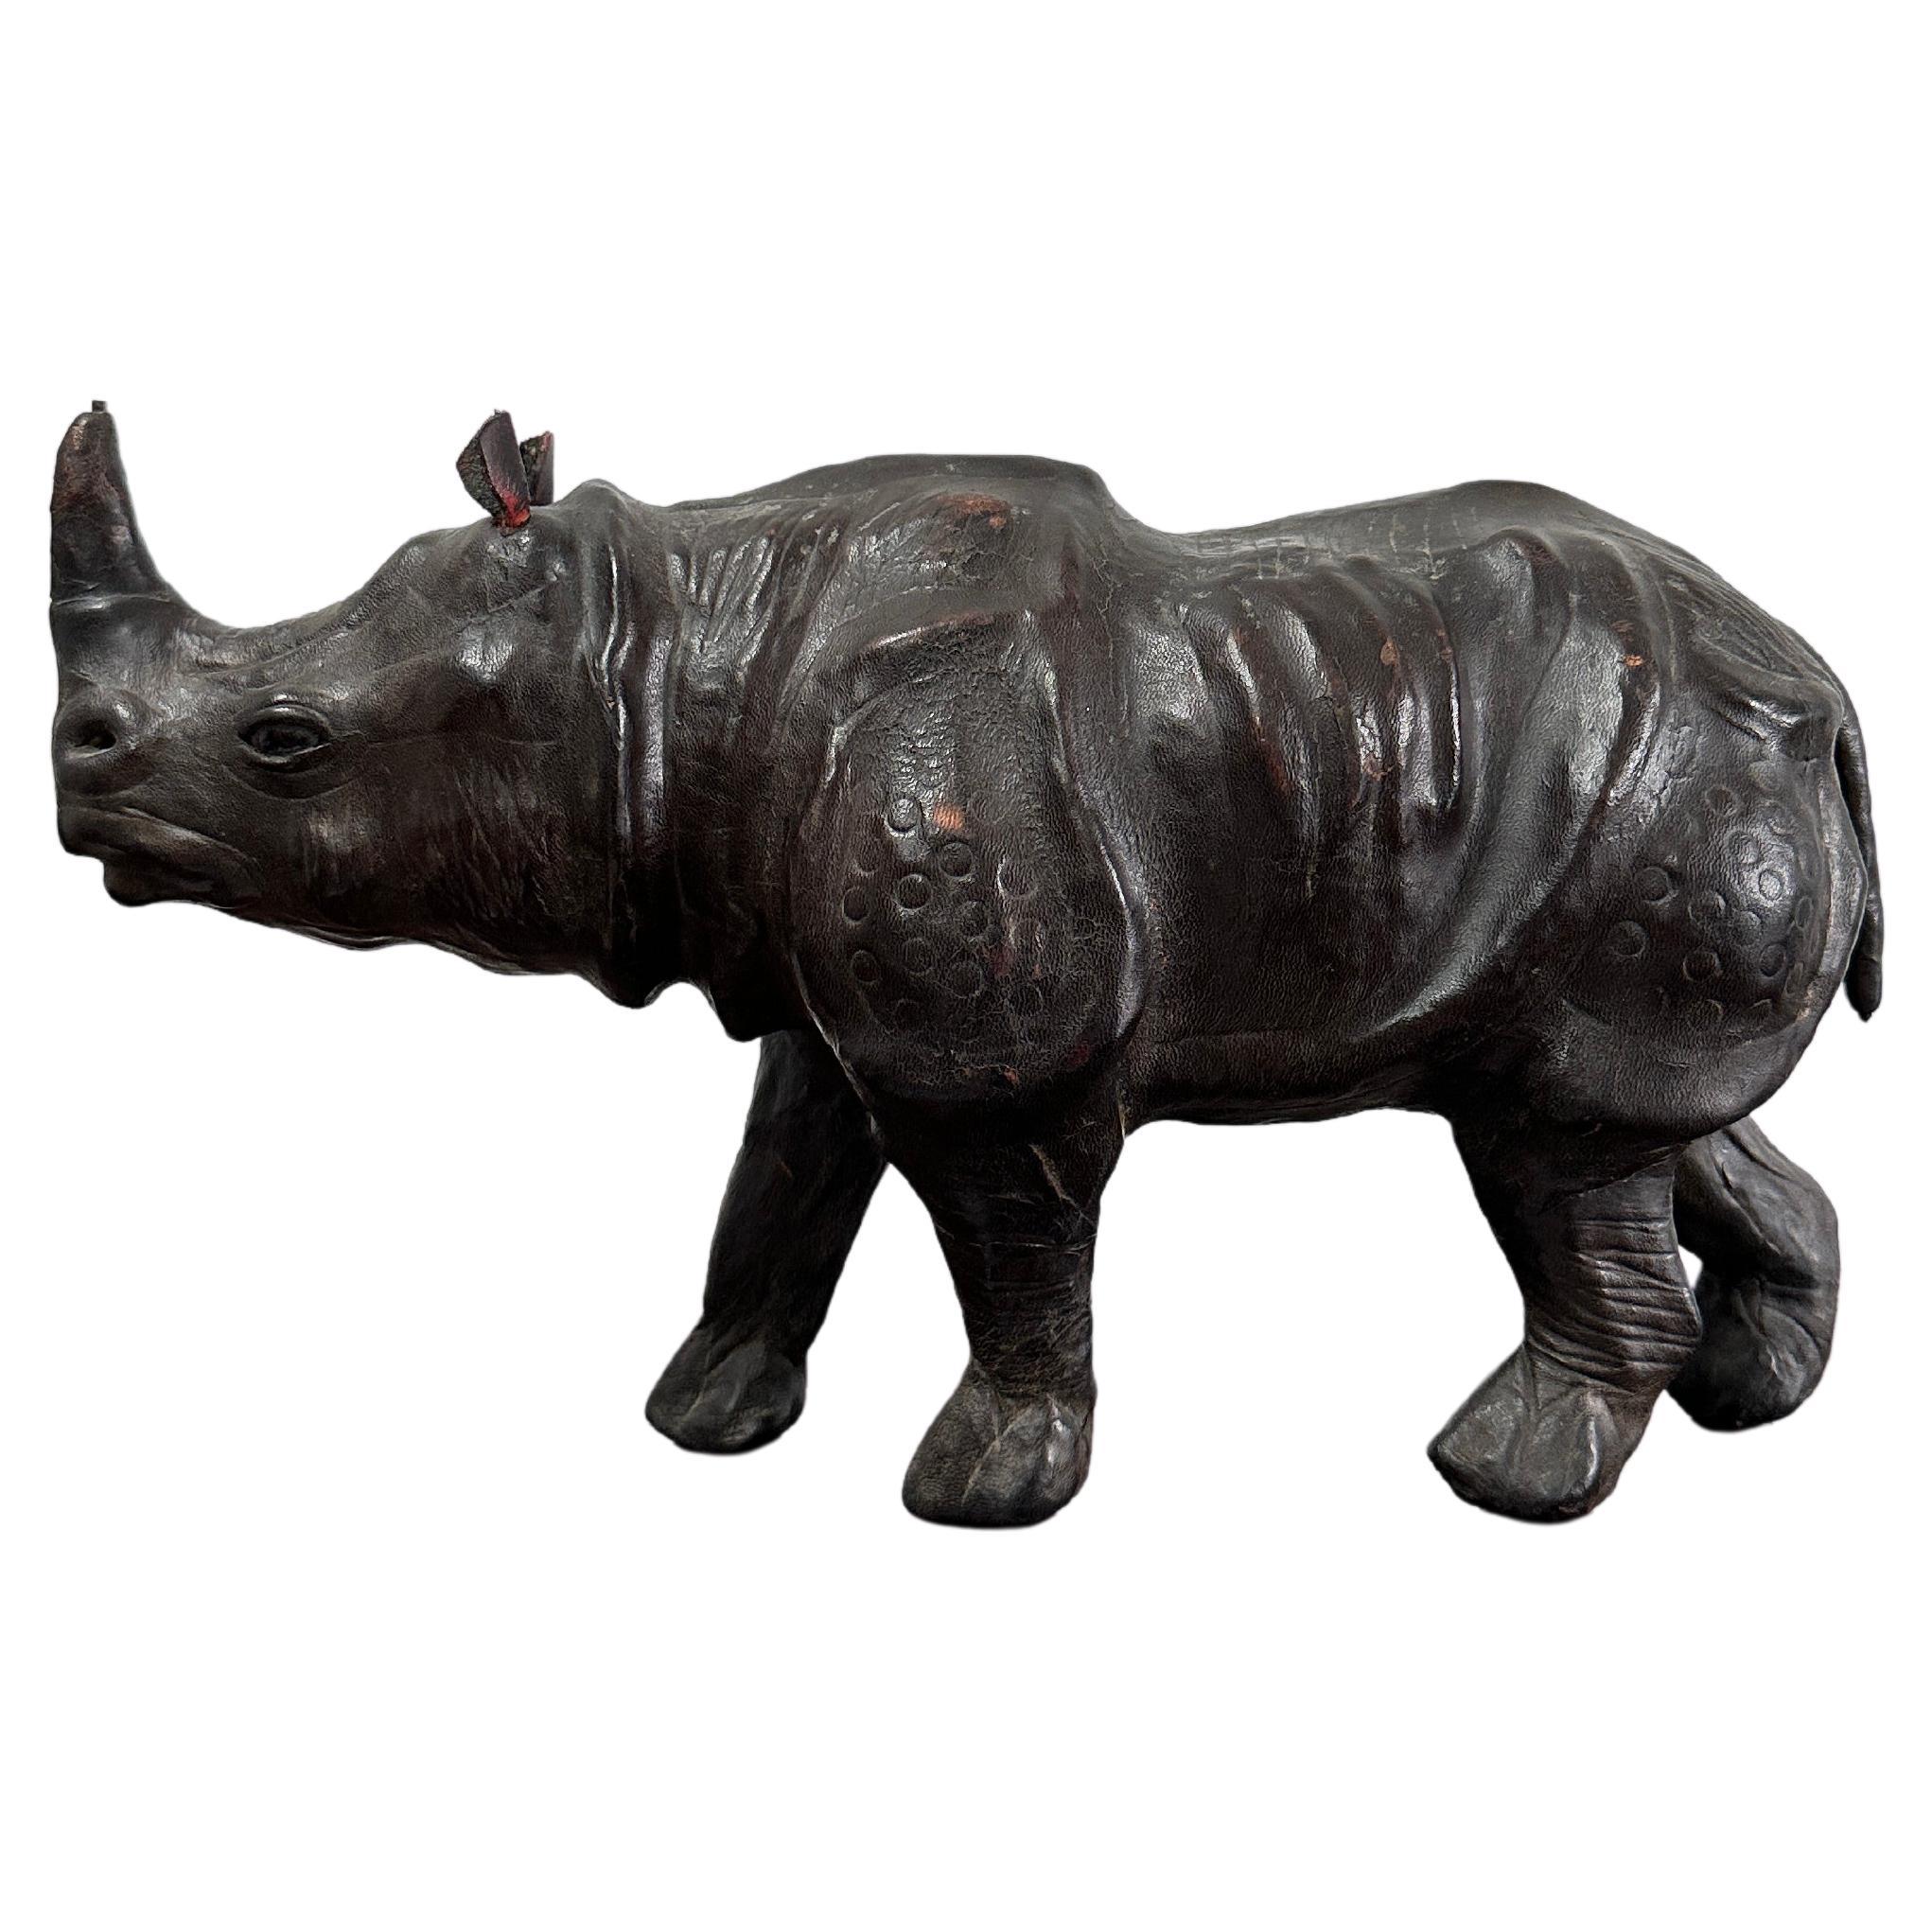 Antique Vintage Leather Wrapped Rhino Maquette Animal Sculpture